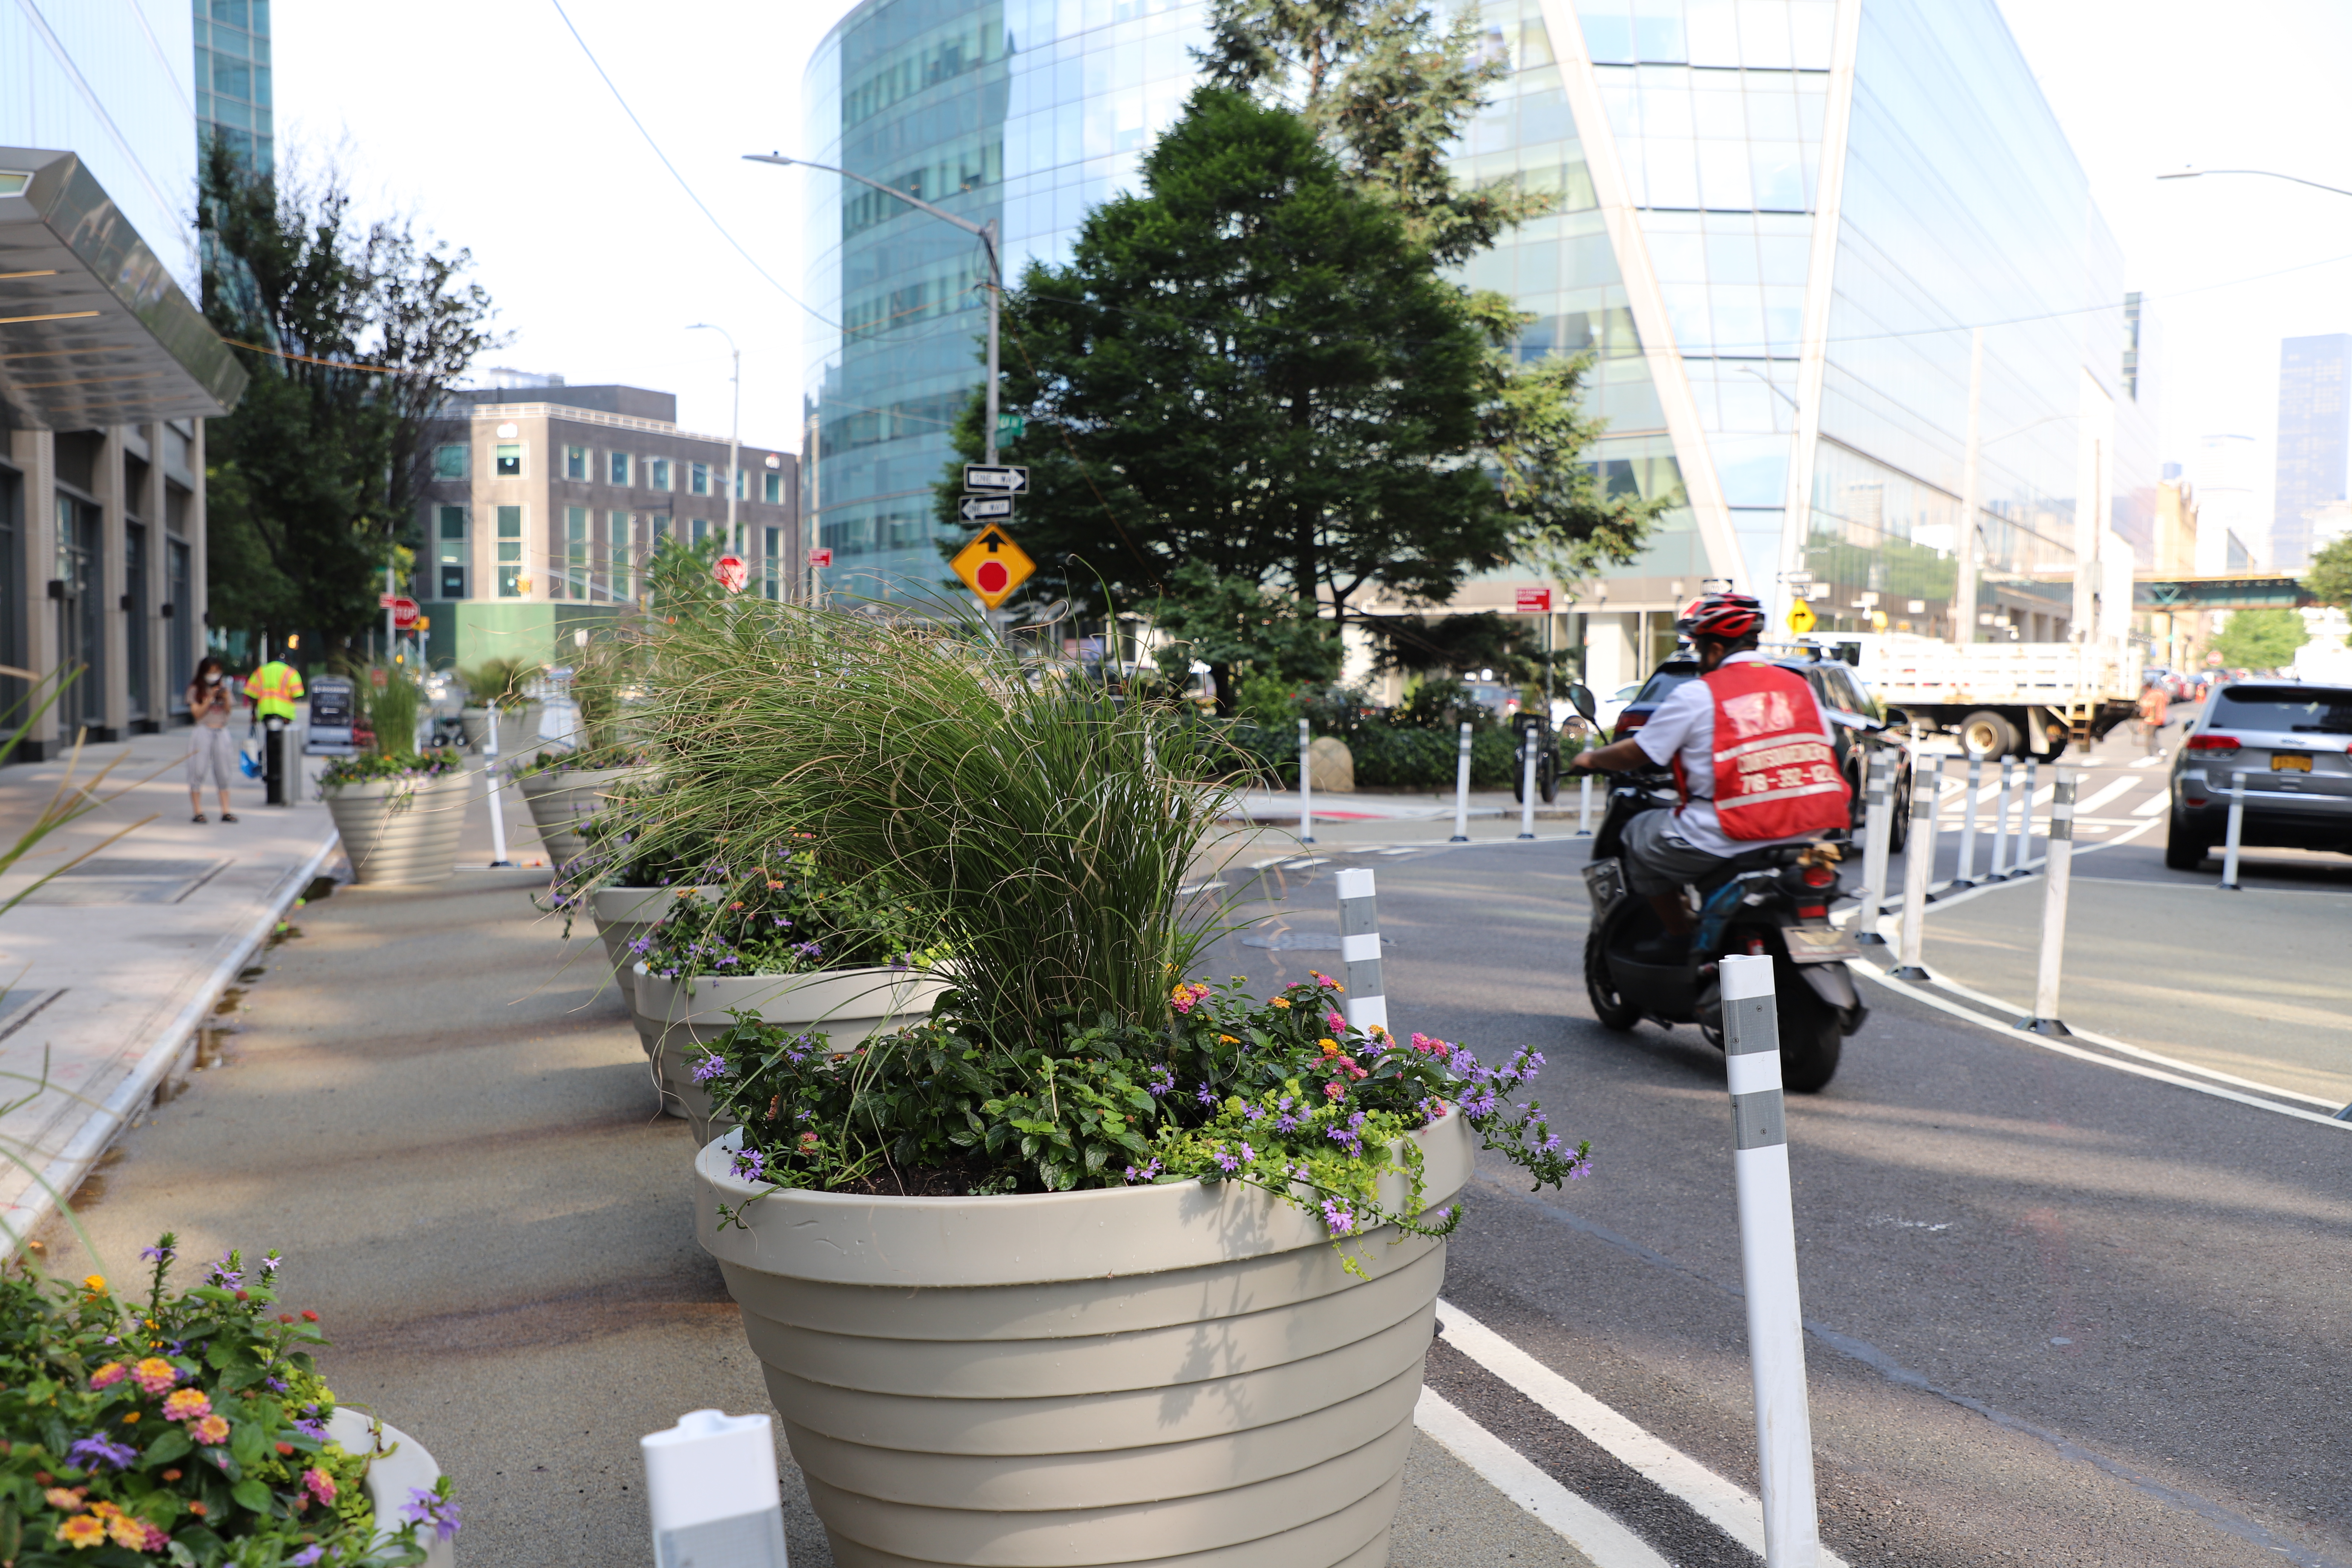 A motorcyclist using the Hunter Shared Street in Long Island City. In the foreground there is expanded pedestrian space lined with planters.